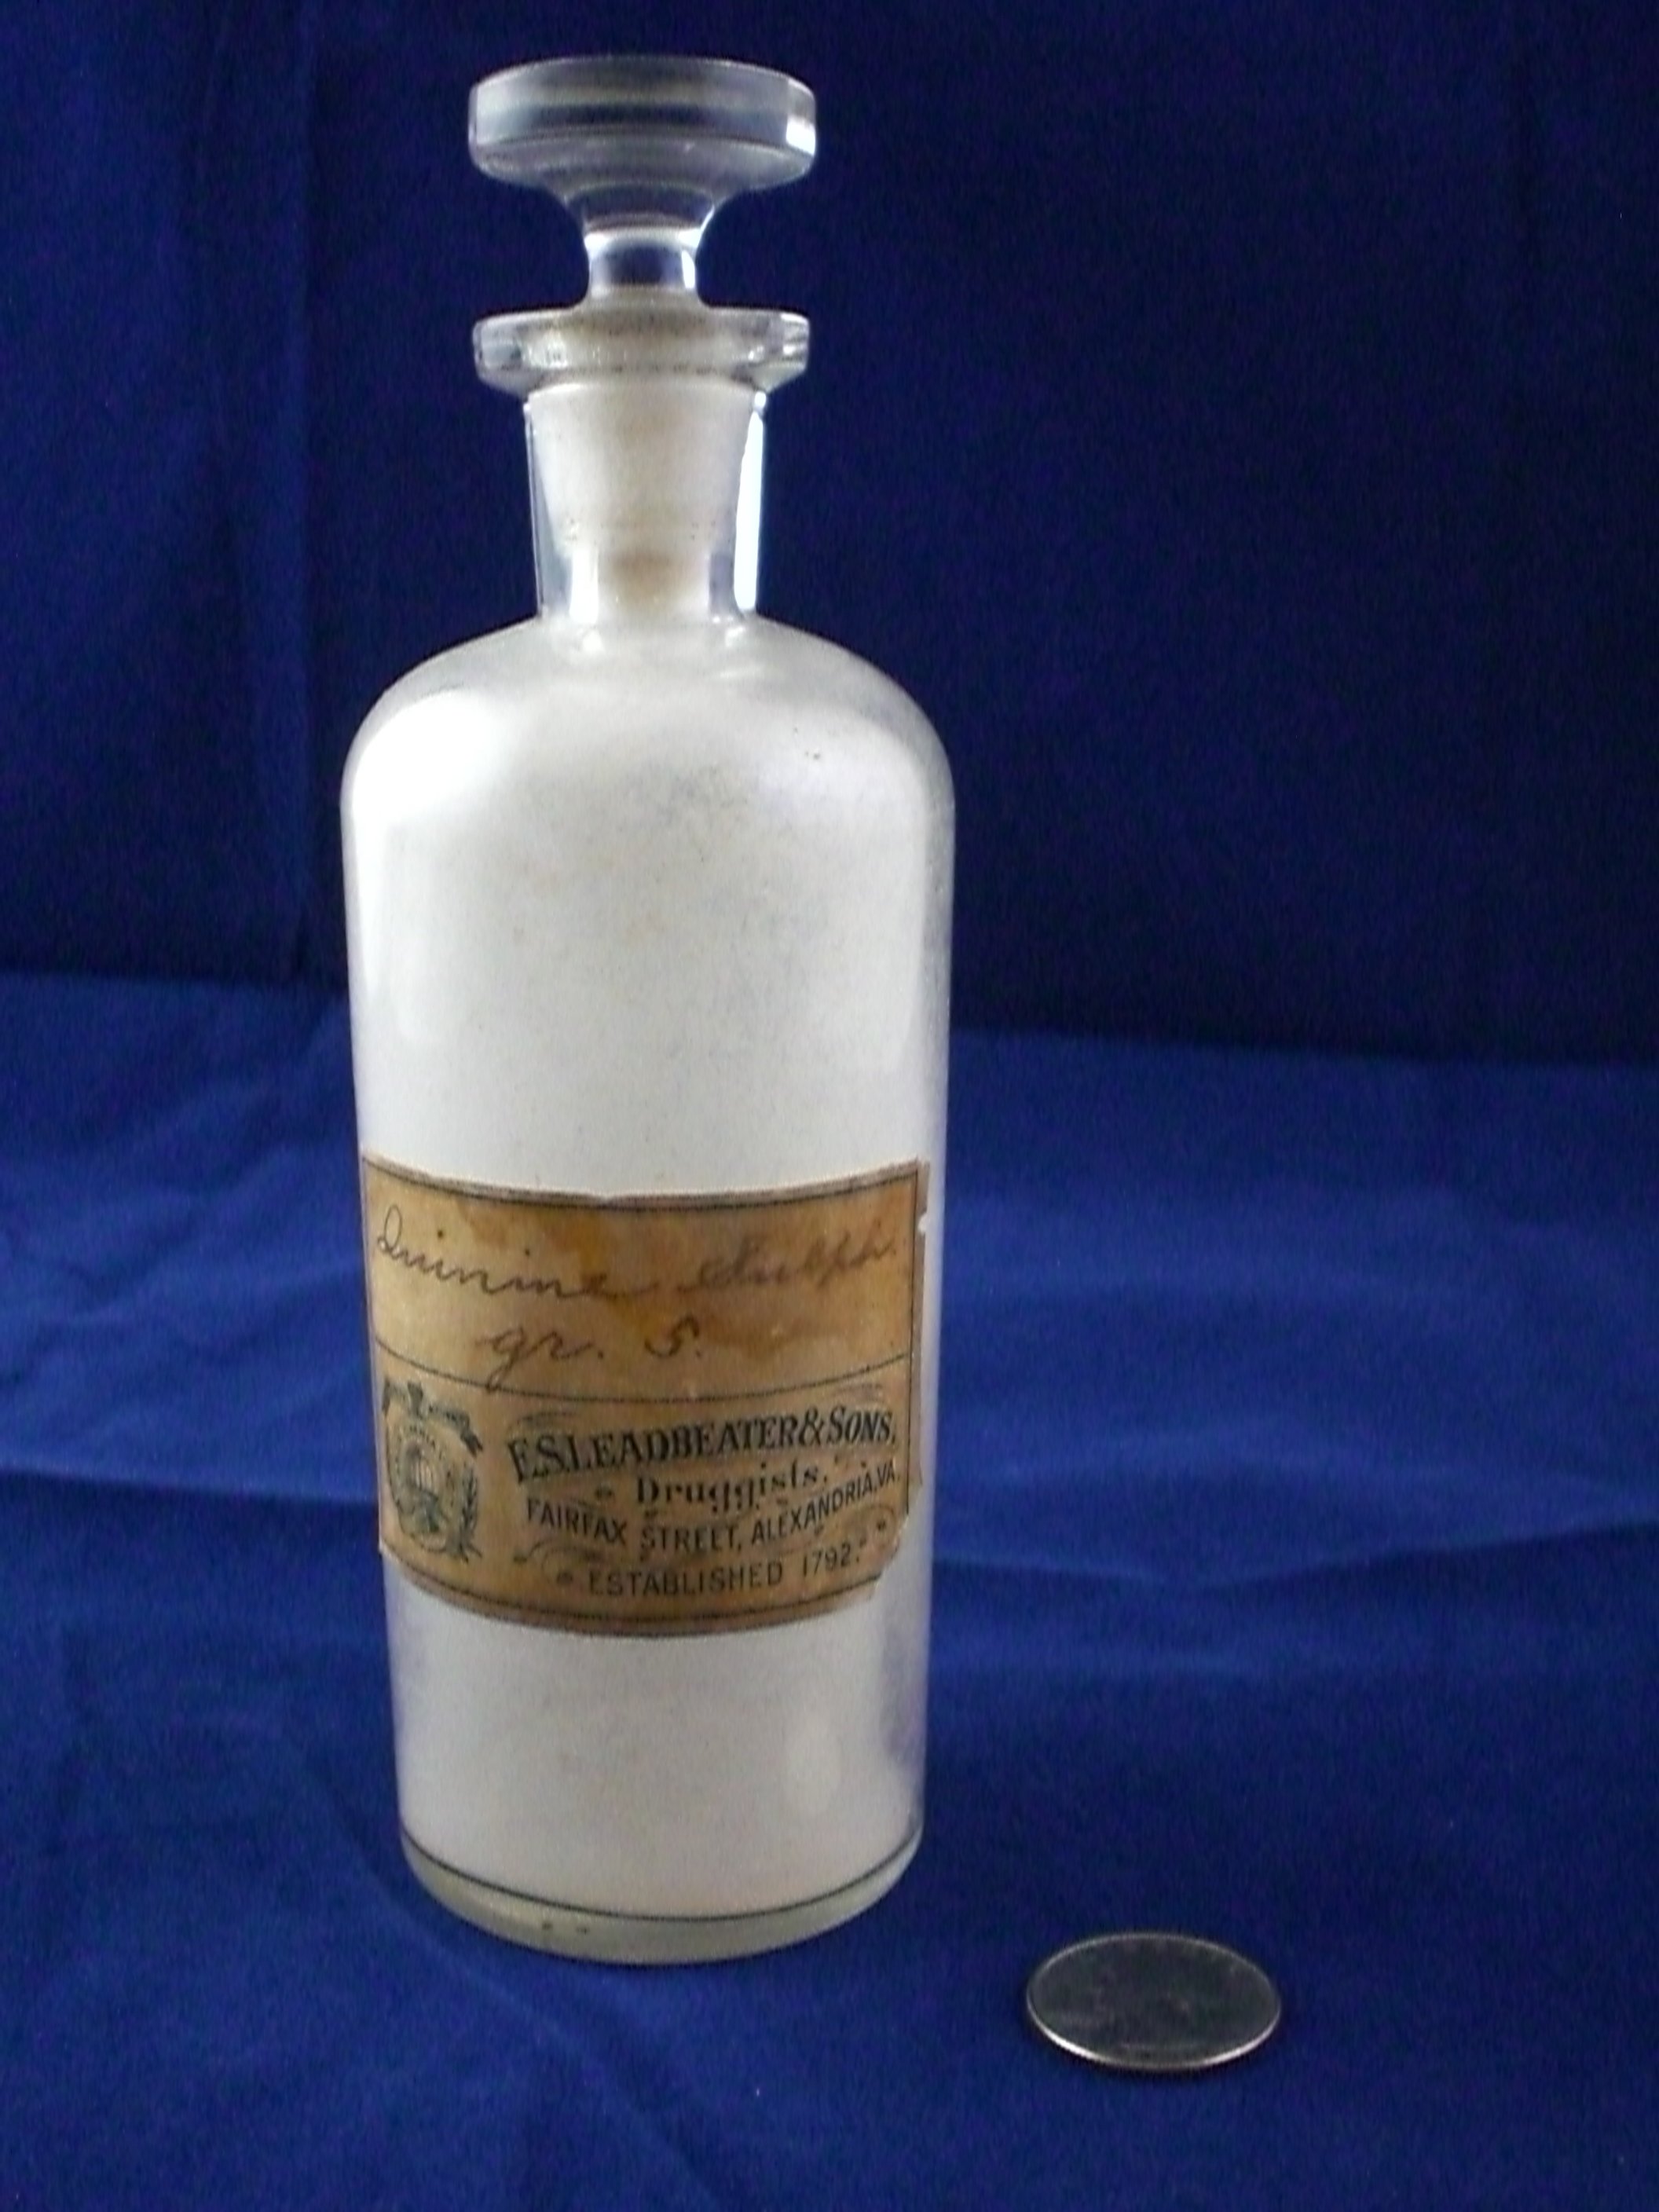 Quinine sulfate Stabler Leadbeater apothecary